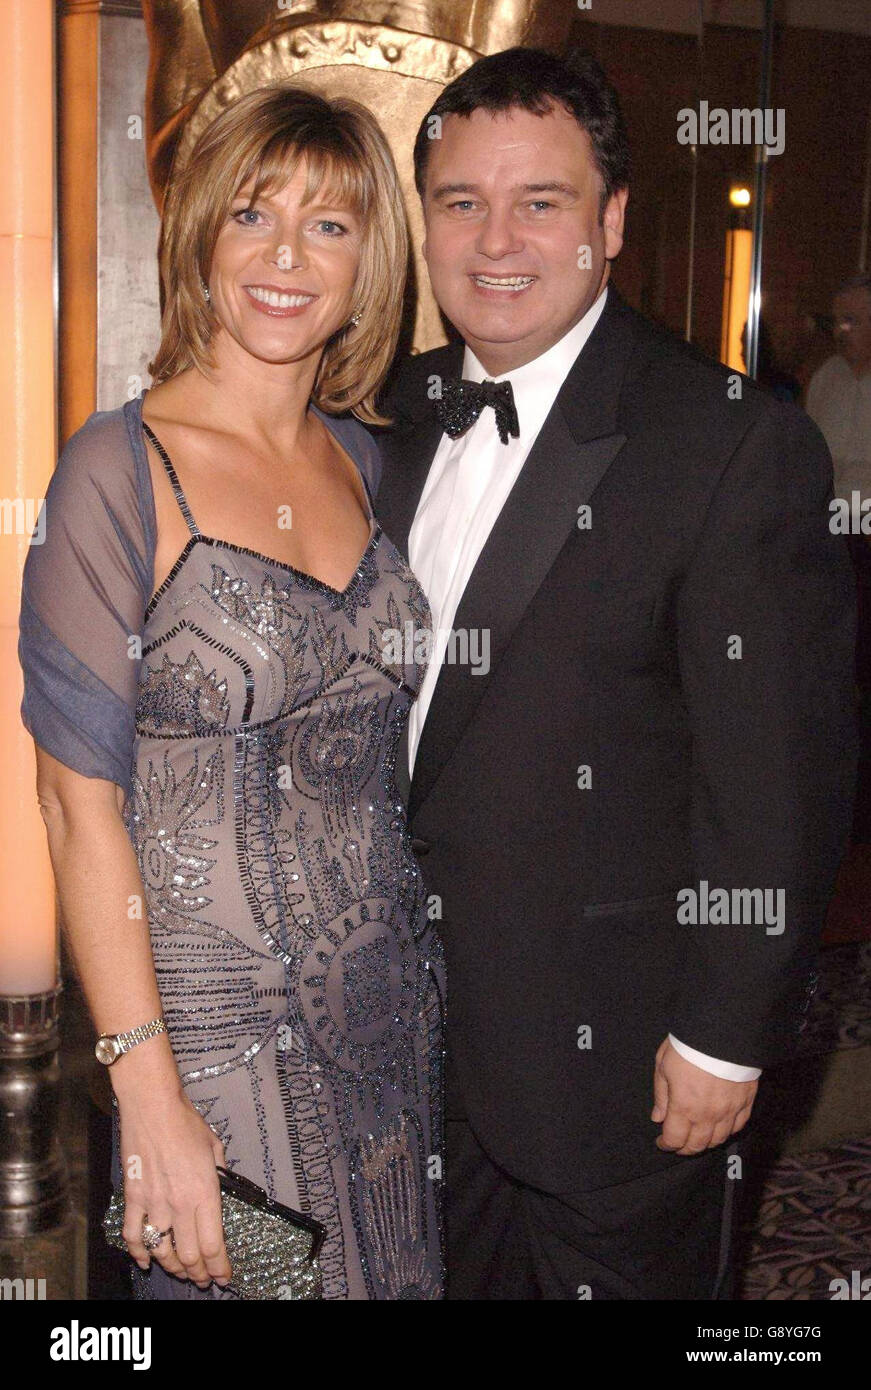 Eamonn Holmes and his wife arrive for a UNICEF fundraising event, at the Park Lane Hotel, Piccadilly, central London, Friday 21 October 2005. The occasion was hosted by UNICEF Goodwill Ambassador Sir Roger Moore. PRESS ASSOCIATION Photo. Photo credit should read: Ian West/PA Stock Photo